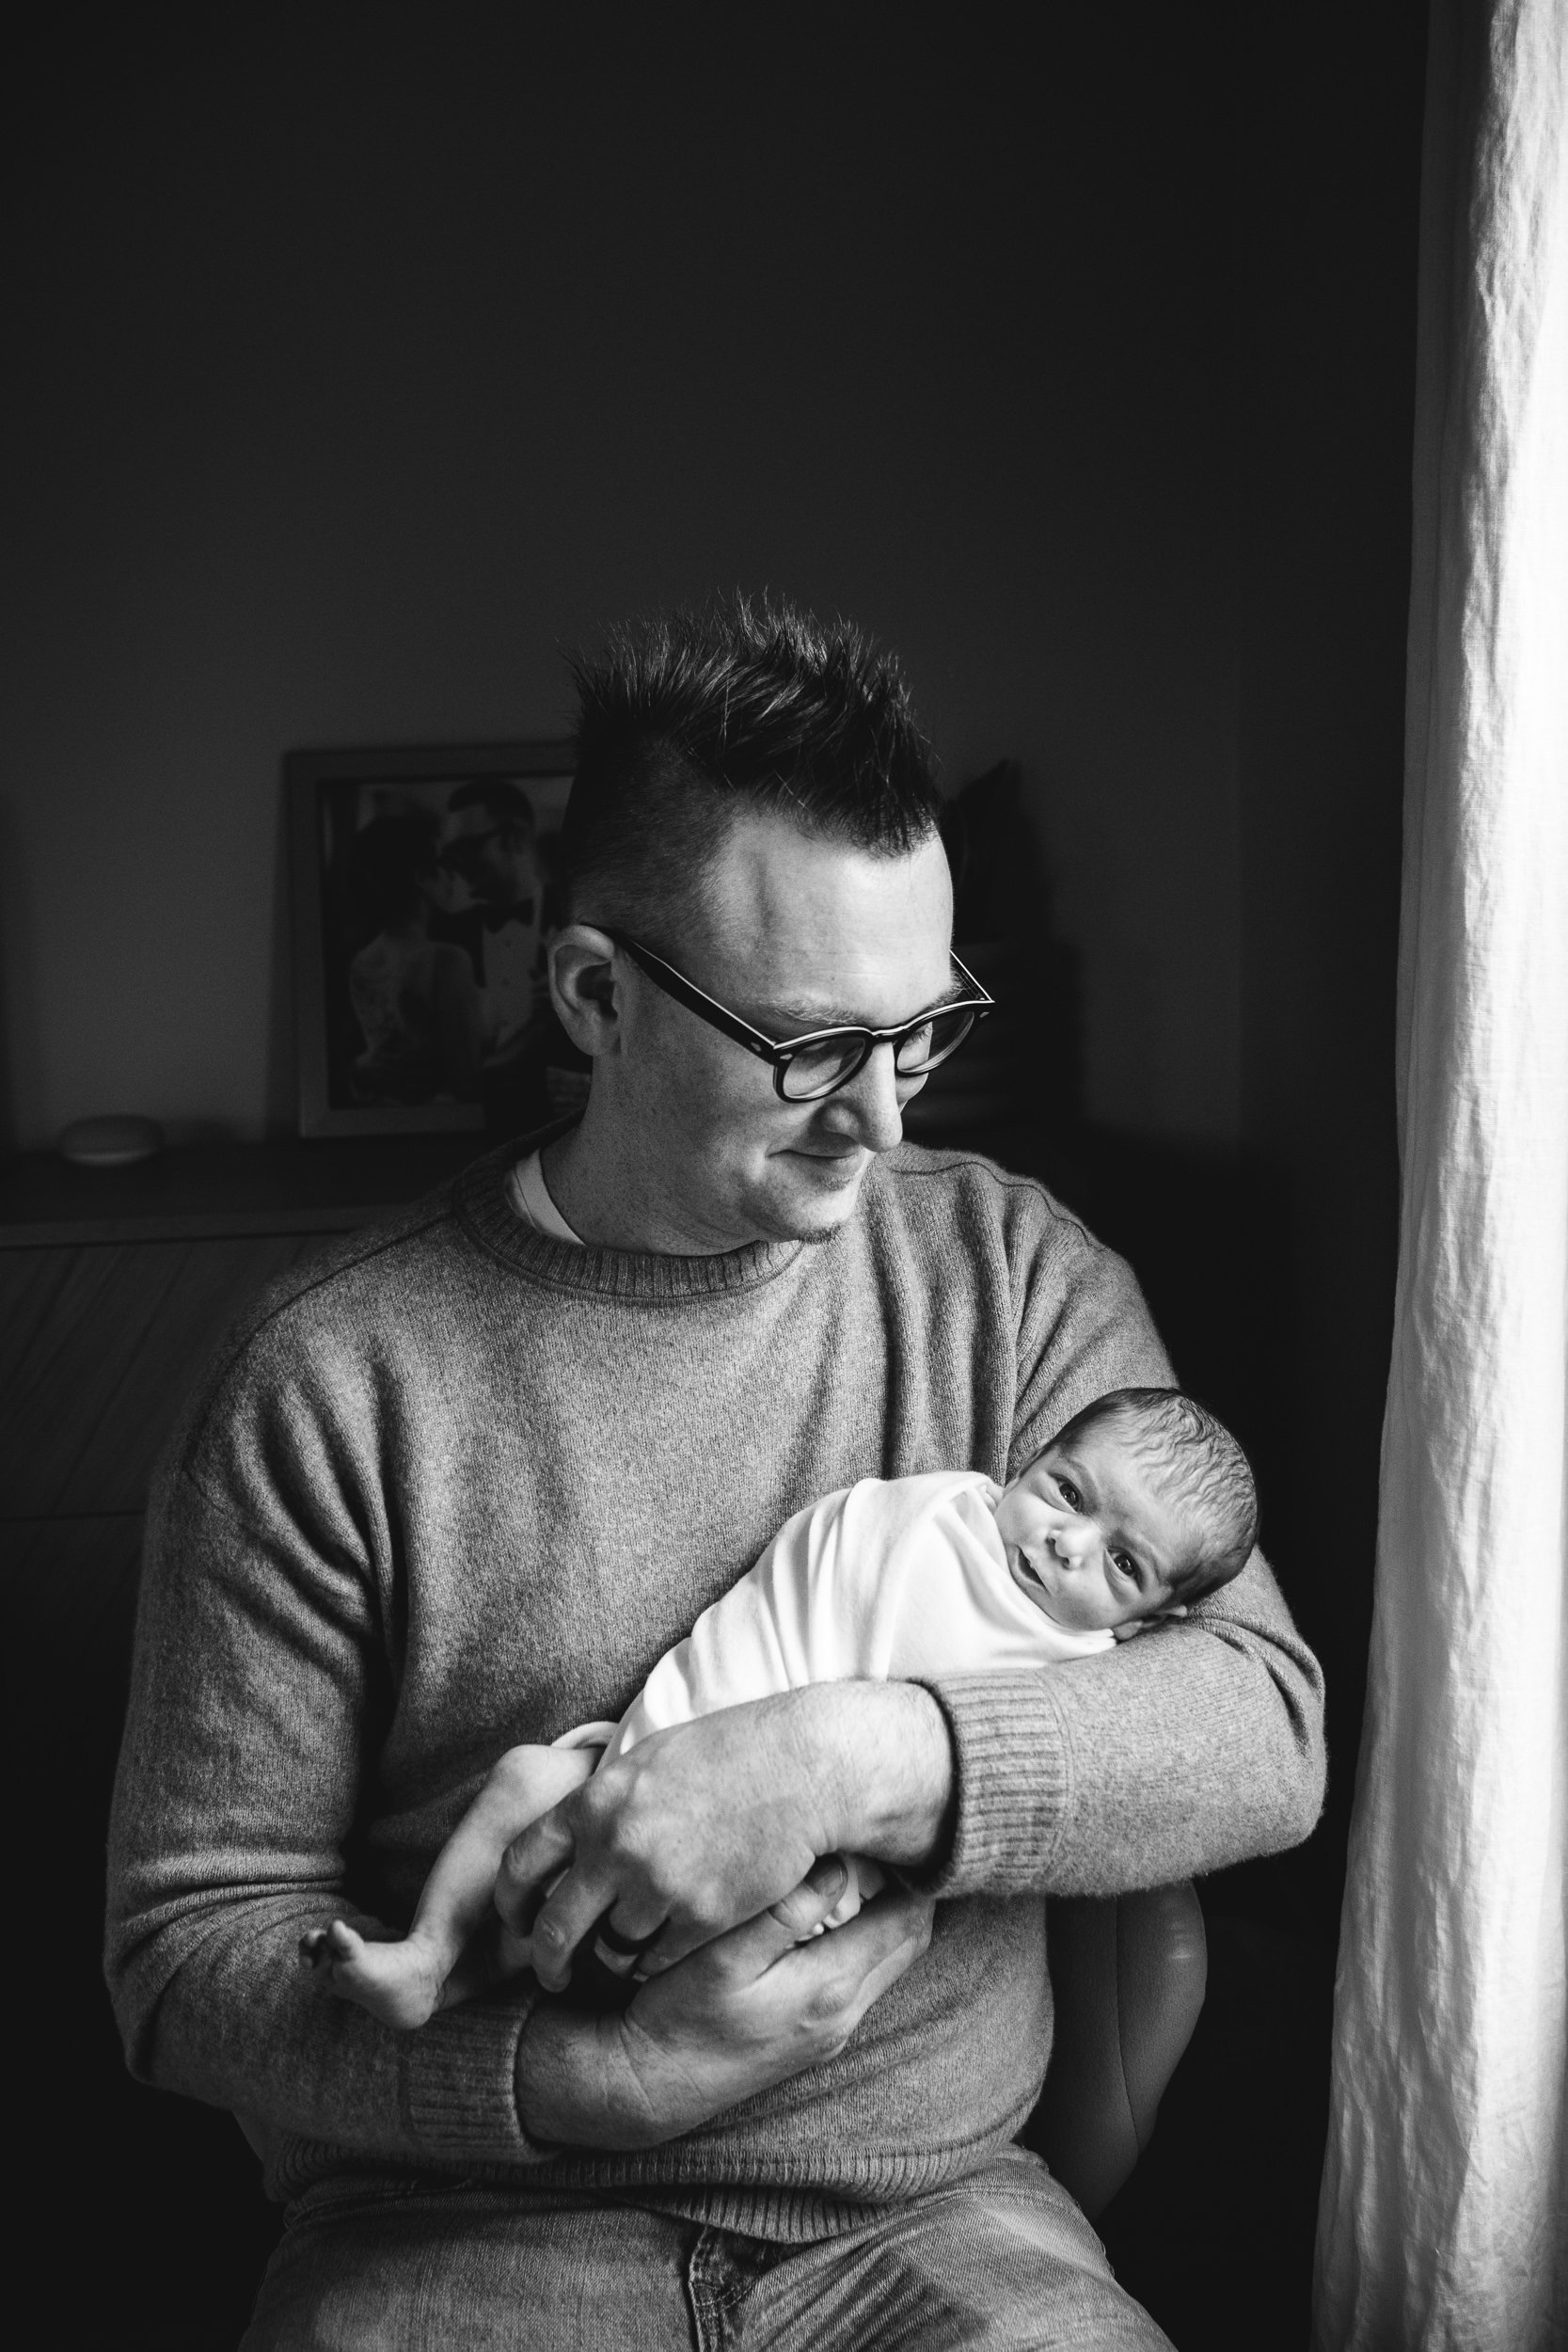  Stunning black and white portrait of a father holding a baby by Nicole Hawkins Photography in New Jersey. New Jersey newborn photo #NicoleHawkinsPhotography #NicoleHawkinsFamily #Newborns #InHomeNewborns #NicoleHawkinsNewborns #NJnewborns #babygirl 